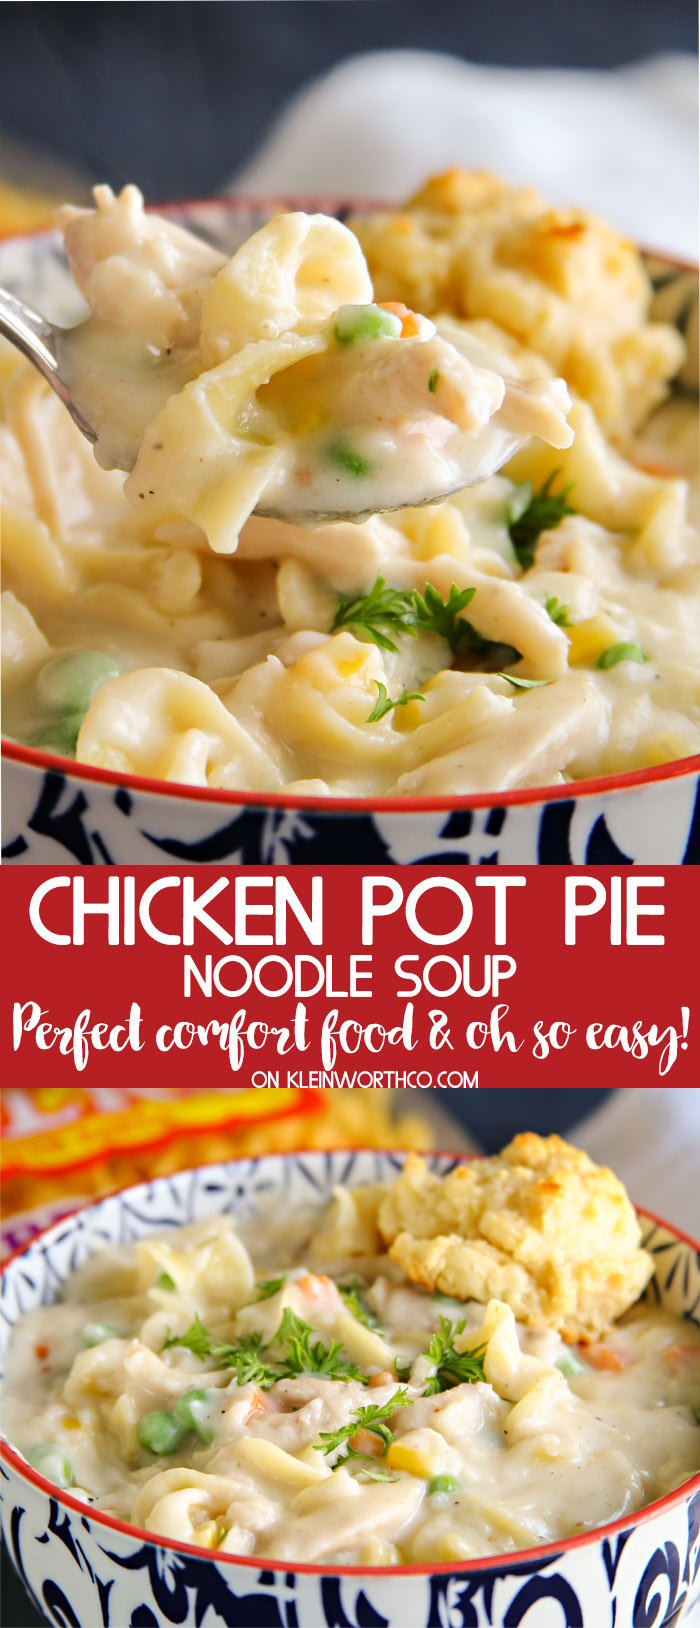 How to make Chicken Pot Pie Noodle Soup